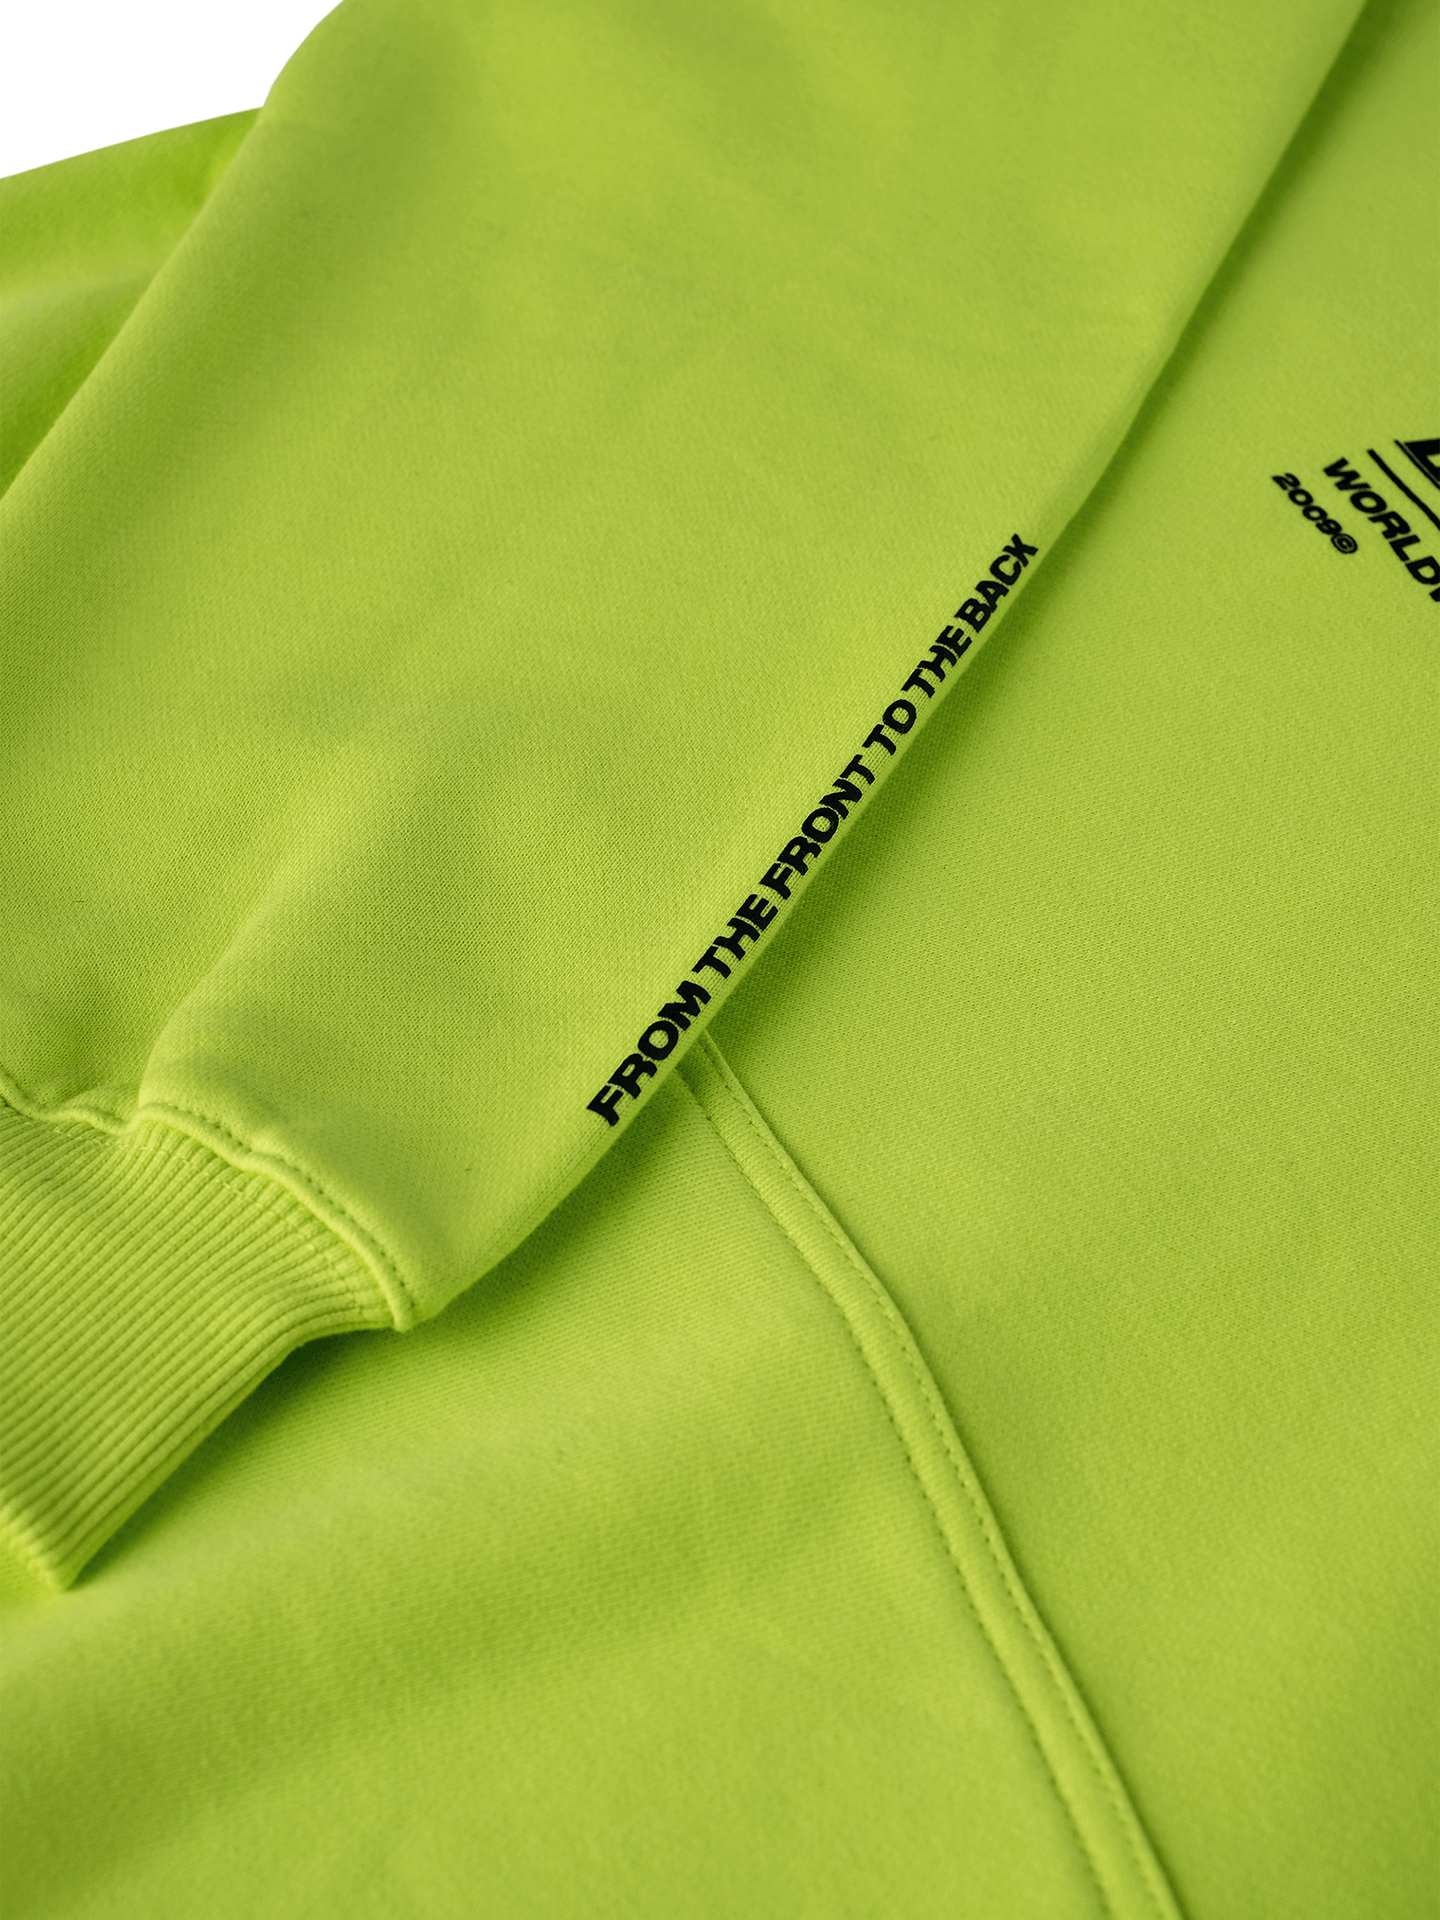 Rave Collective Green Hoodie -Close up shot of the forearm featuring black screen print with the lettering "From the front to the back"